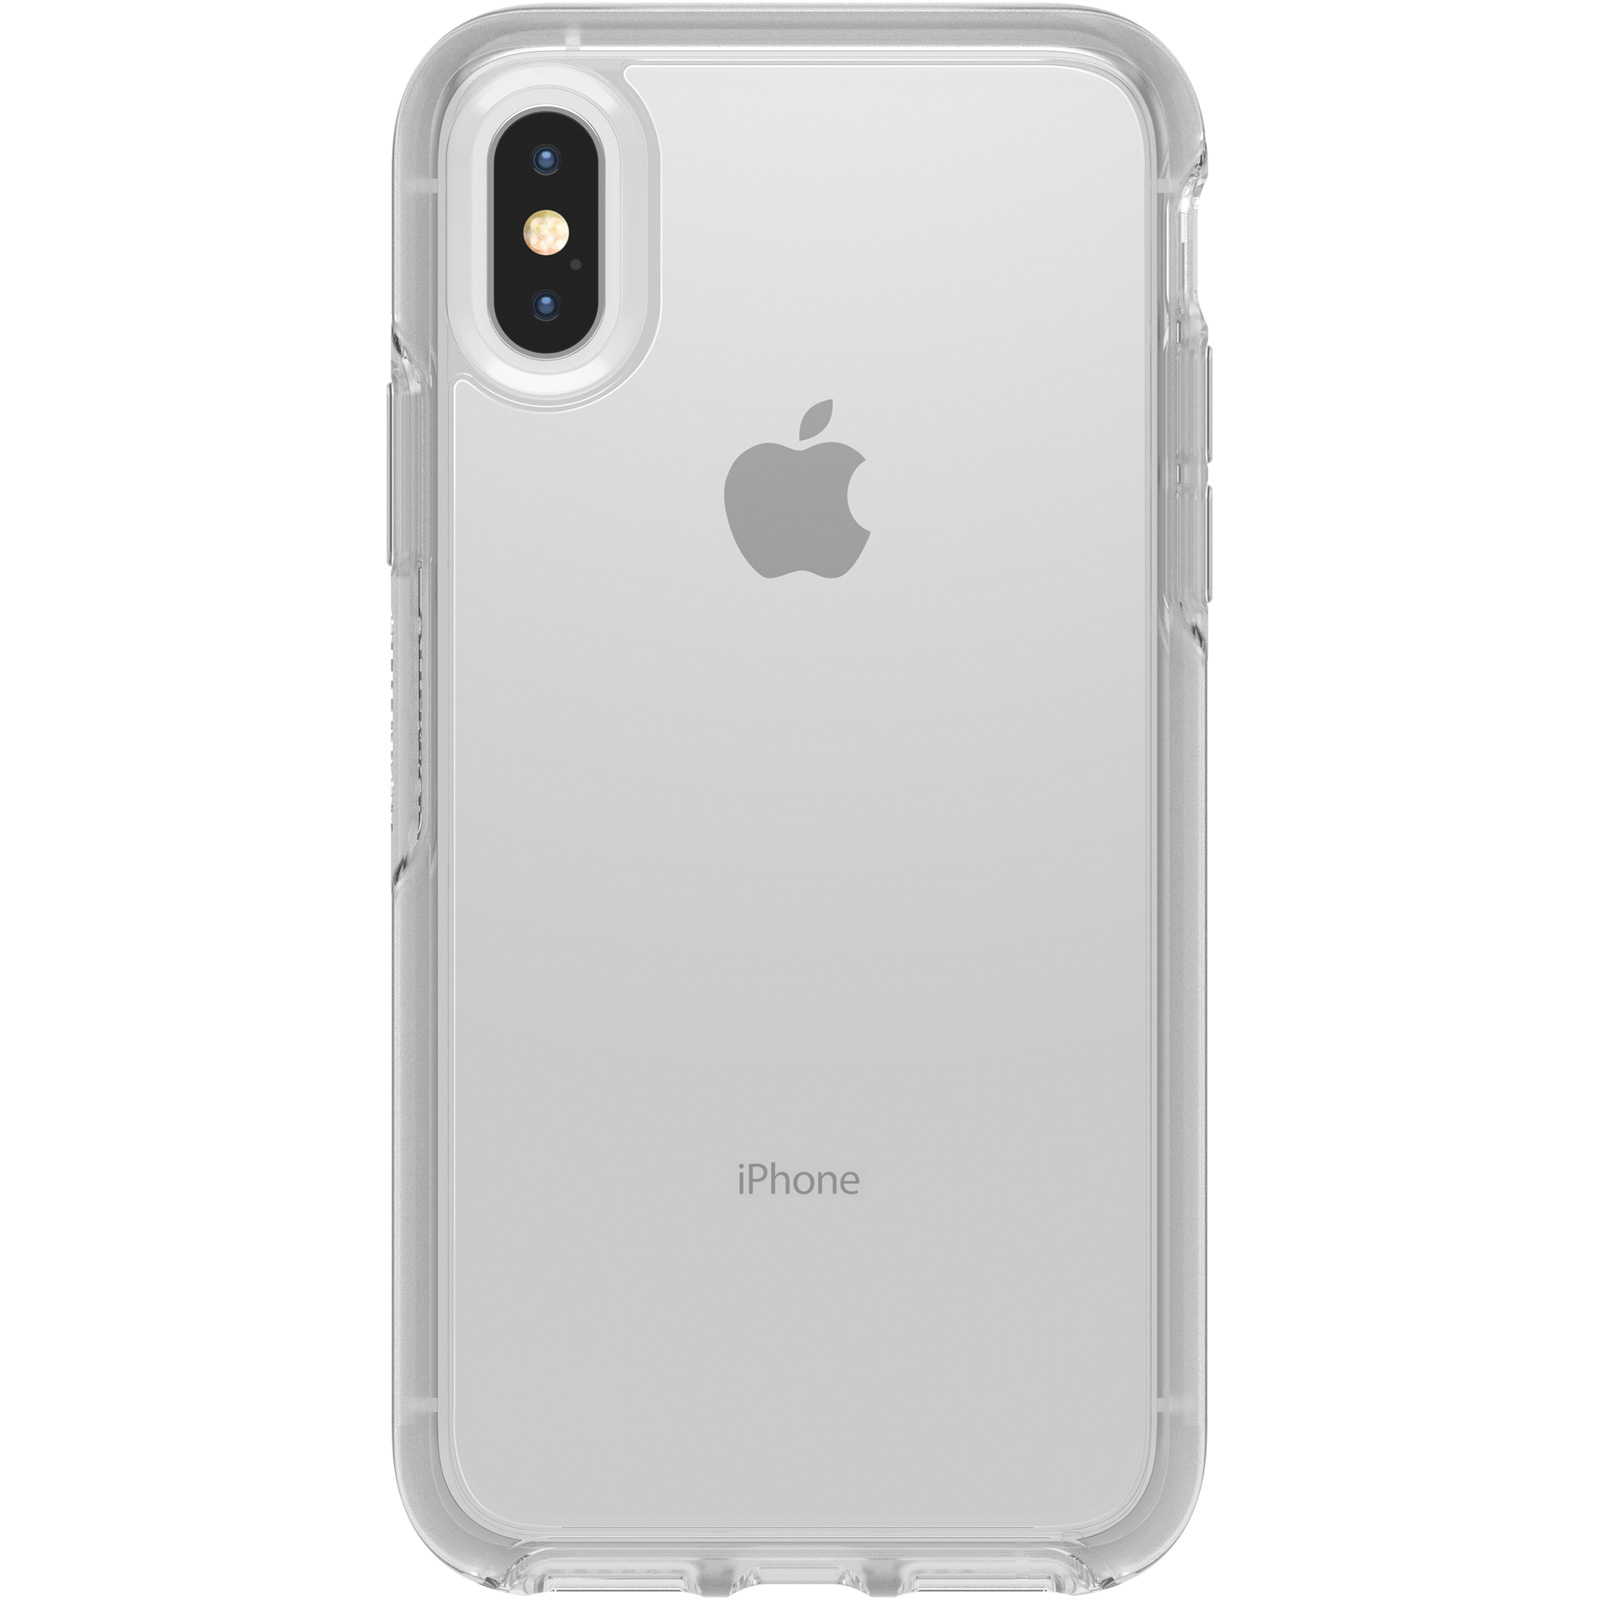 For iPhone X/XS Ultra Thin Transparent Clear Soft TPU Silicone